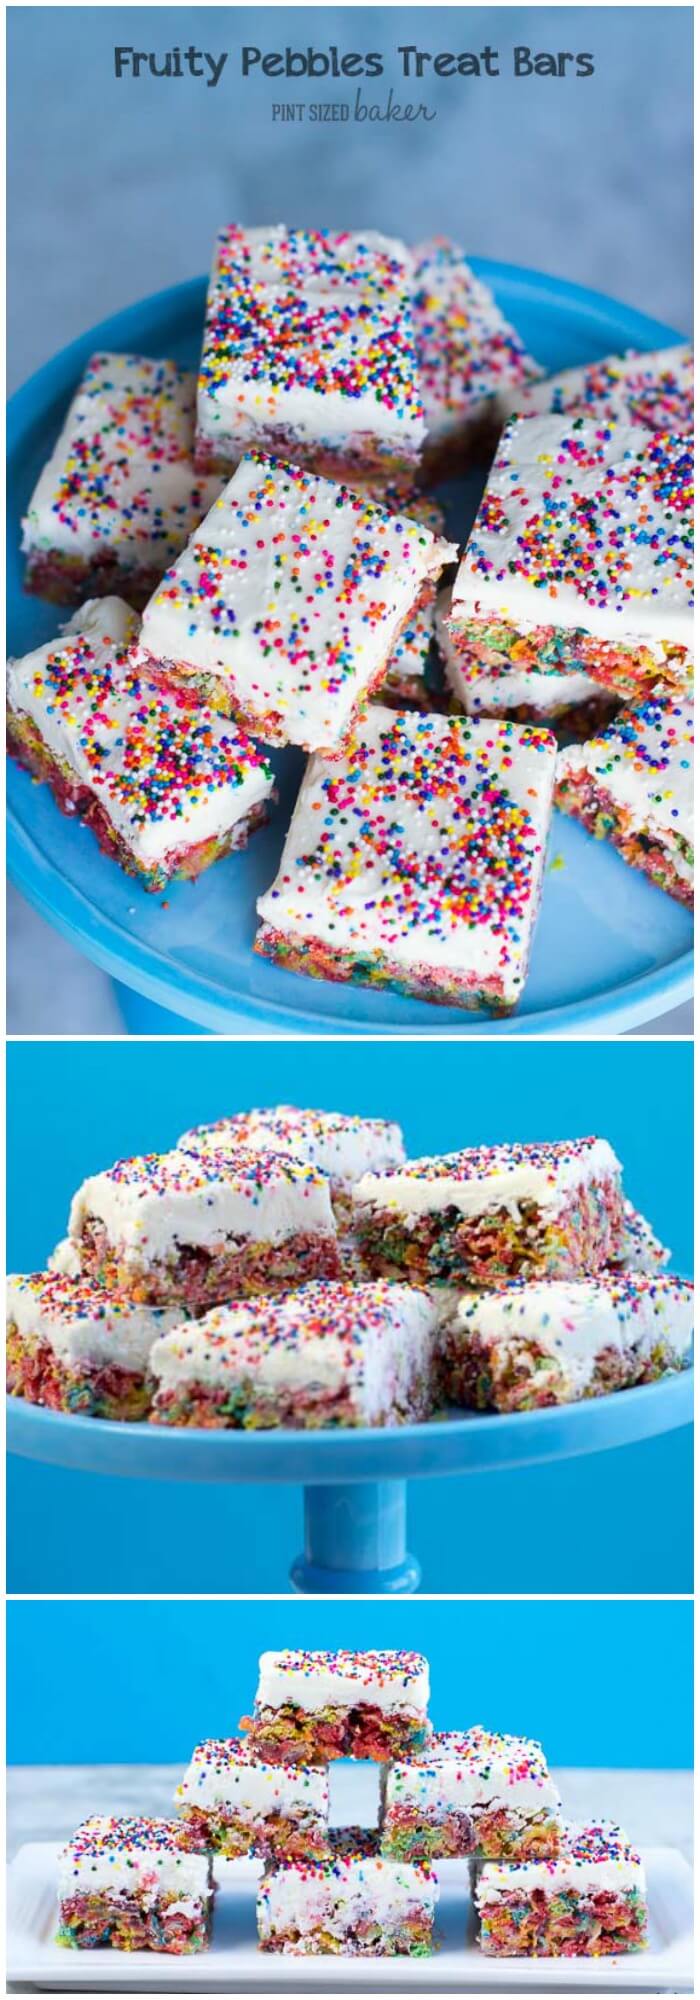 Who loves rainbows?? This gal does! These Fruity Pebbles Bars have all the colors in the rainbow and they were the perfect addition to my party table!